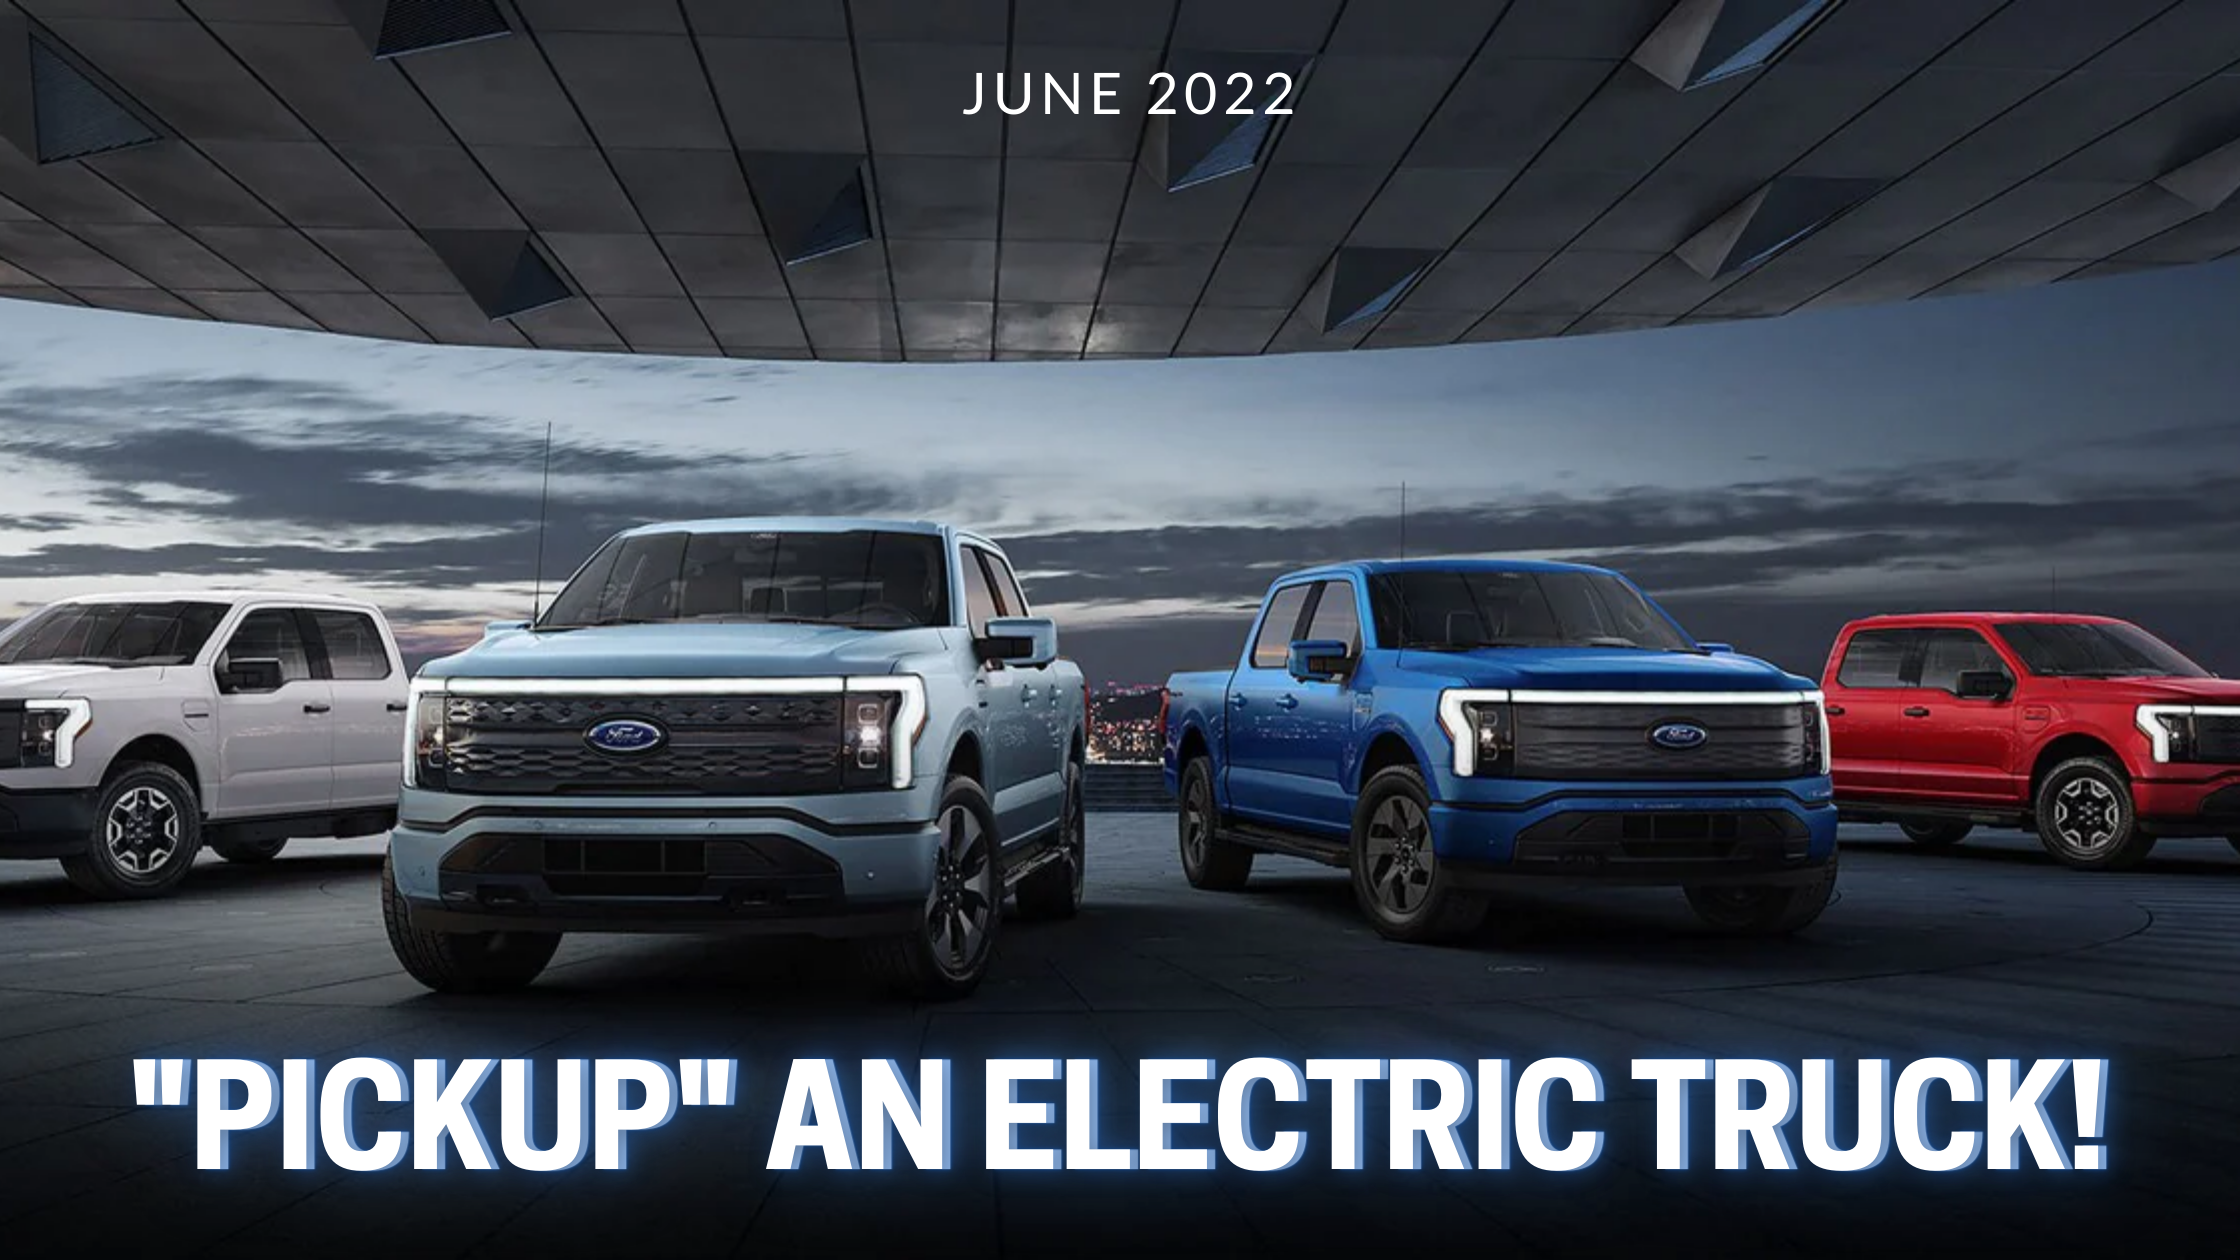 “Pickup” an Electric Truck!